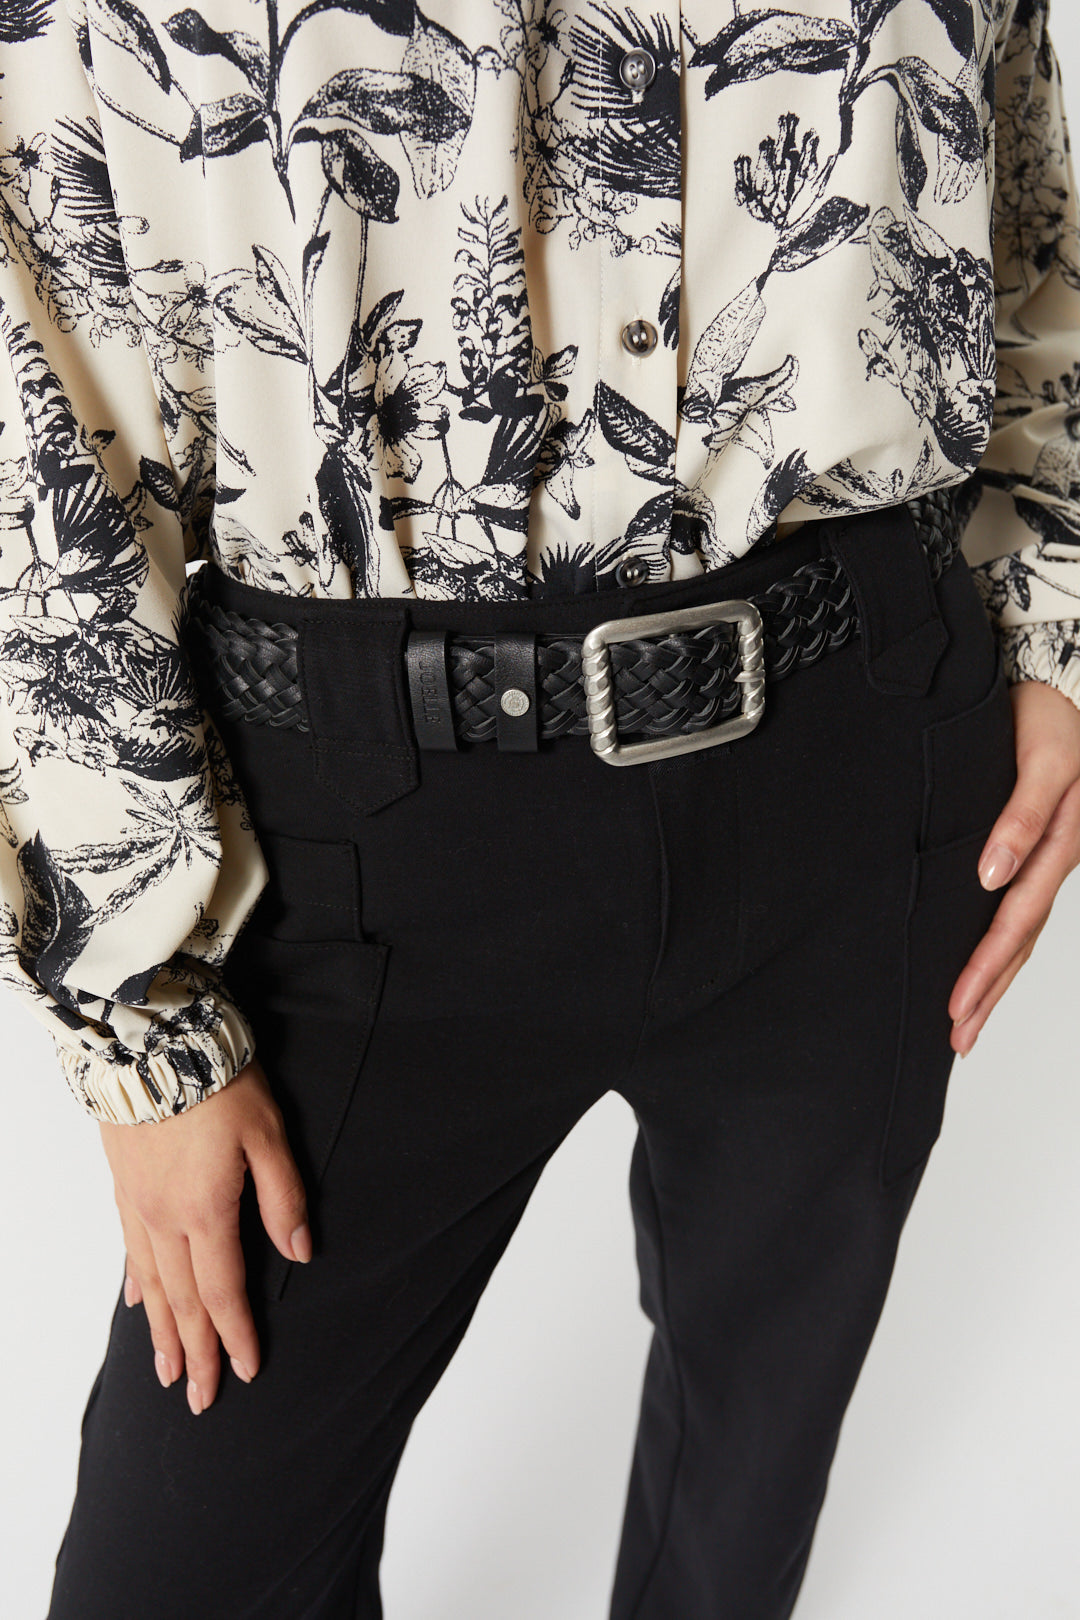 Black braided belt with silver buckle | Mehdi